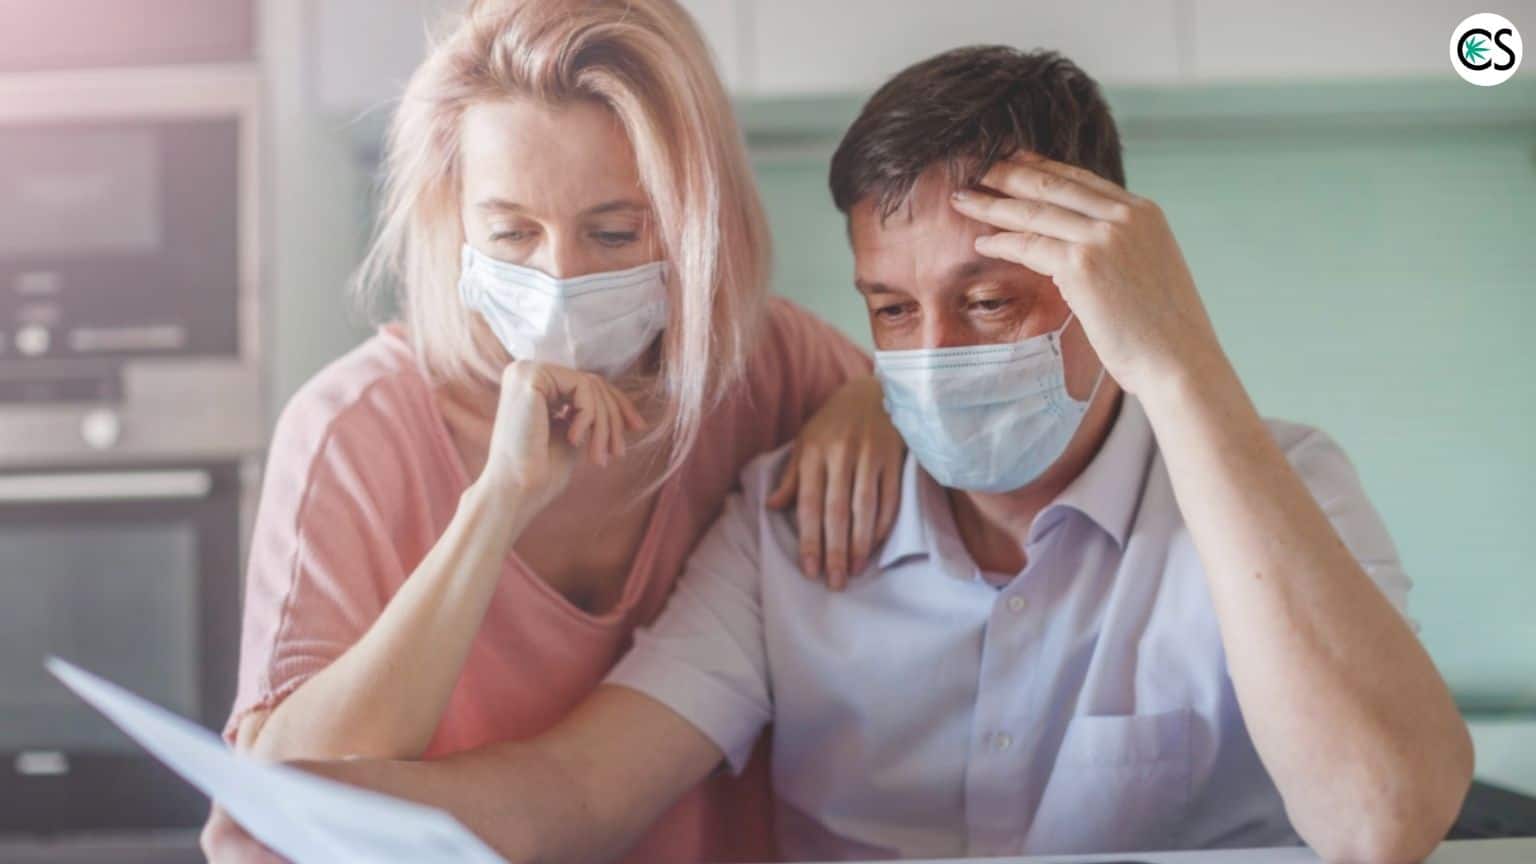 How To Stay Calm During The Pandemic By Using CBD [UPDATED December 2020] 1